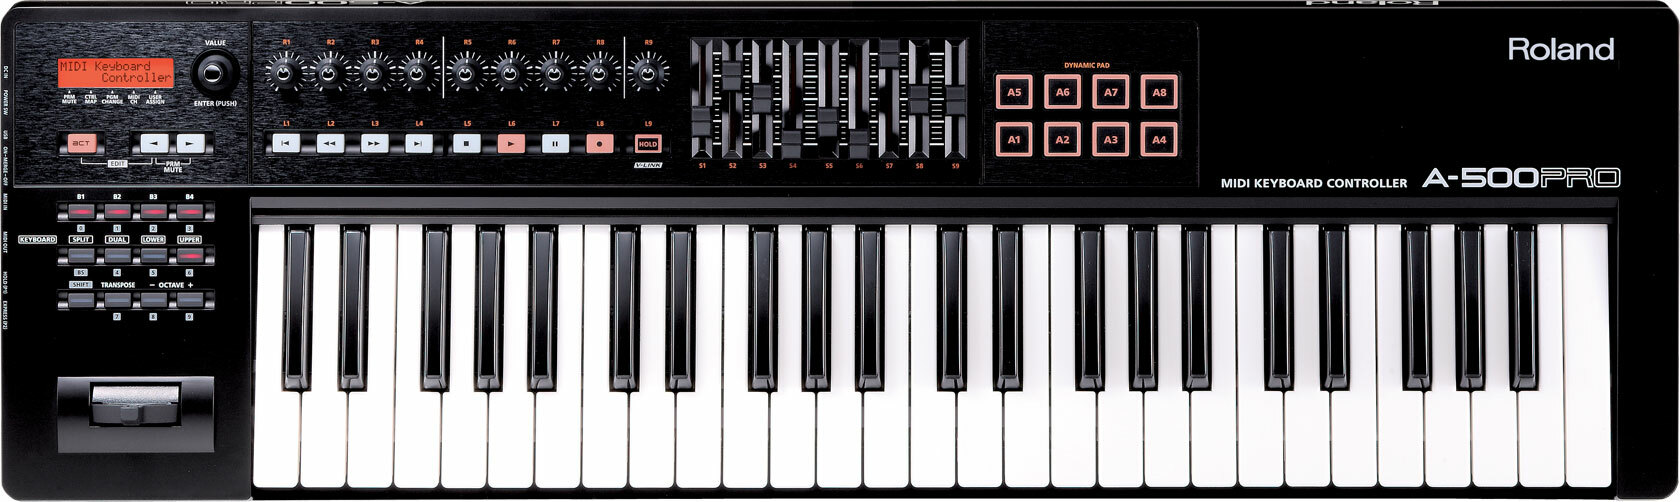 Roland A500 Pro-r - Controller-Keyboard - Main picture